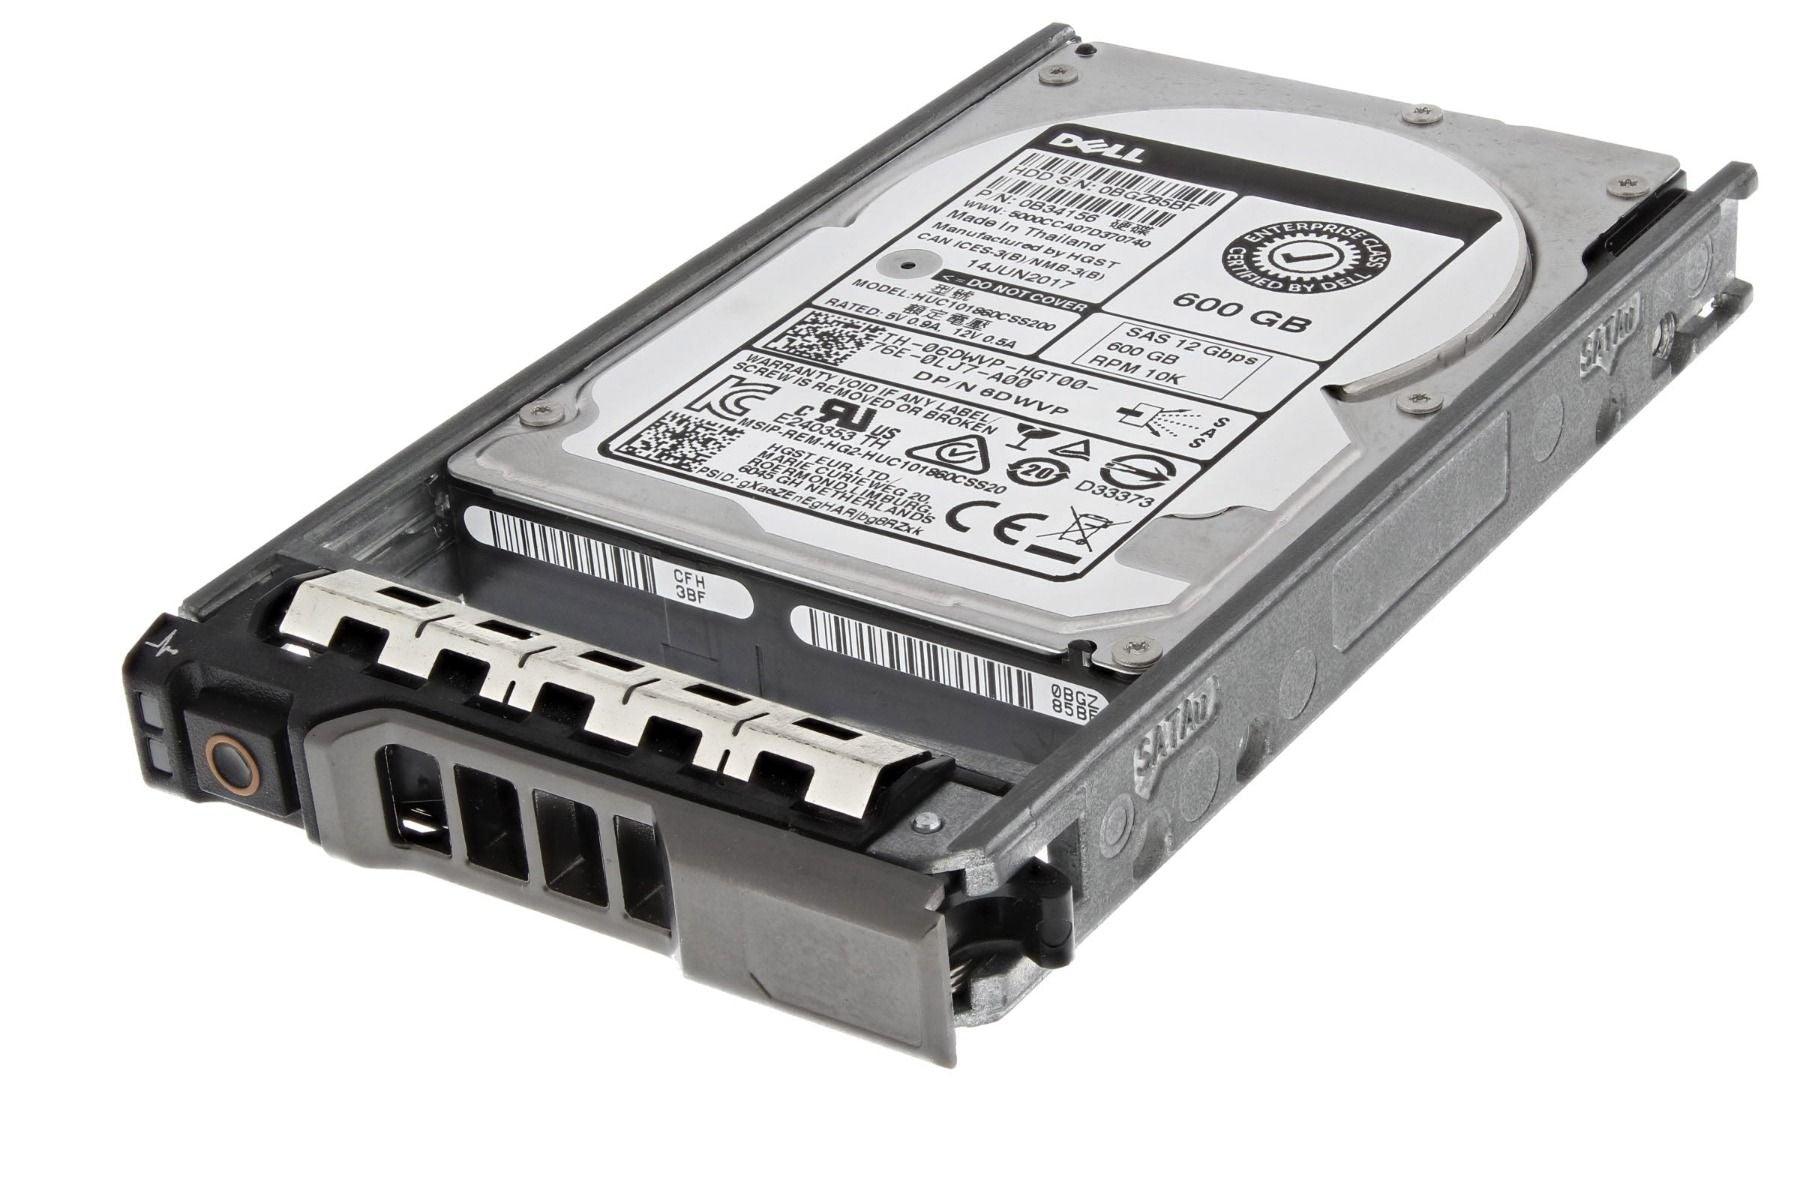 Dell 10DR3 600Gb 10k rpm 2.5'' SAS 12Gbps Hard Drive